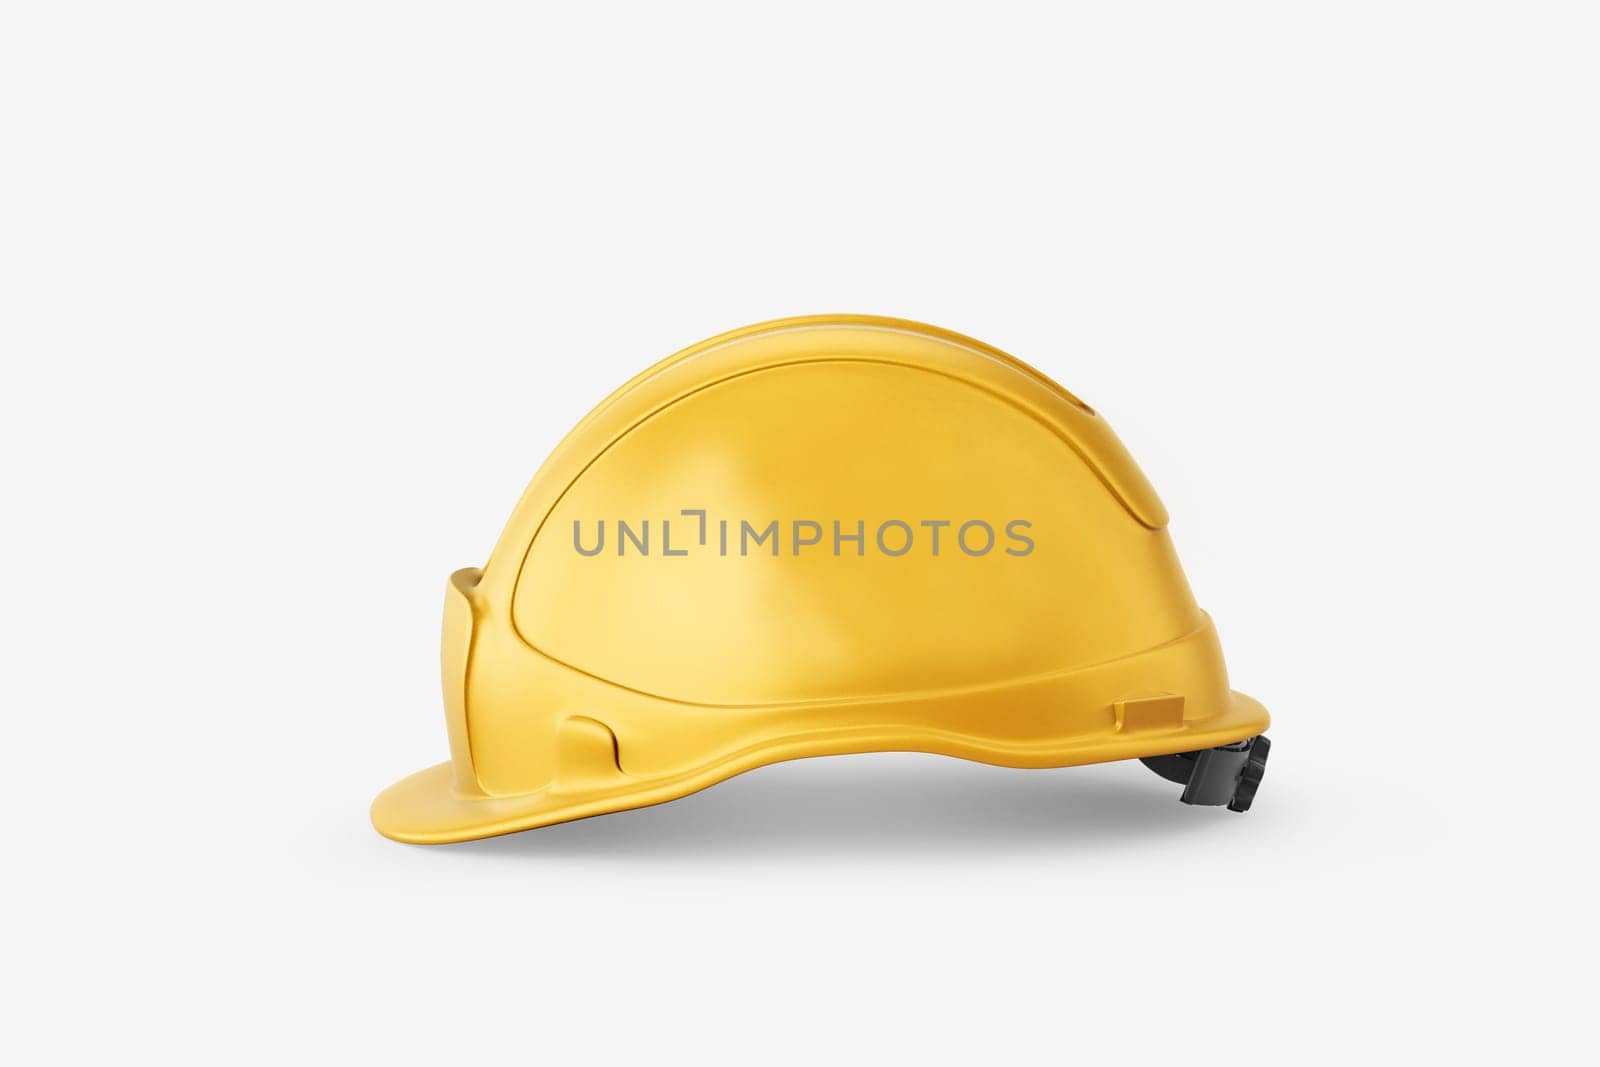 Plastic protective helmet highlighted on a white background by Mastak80